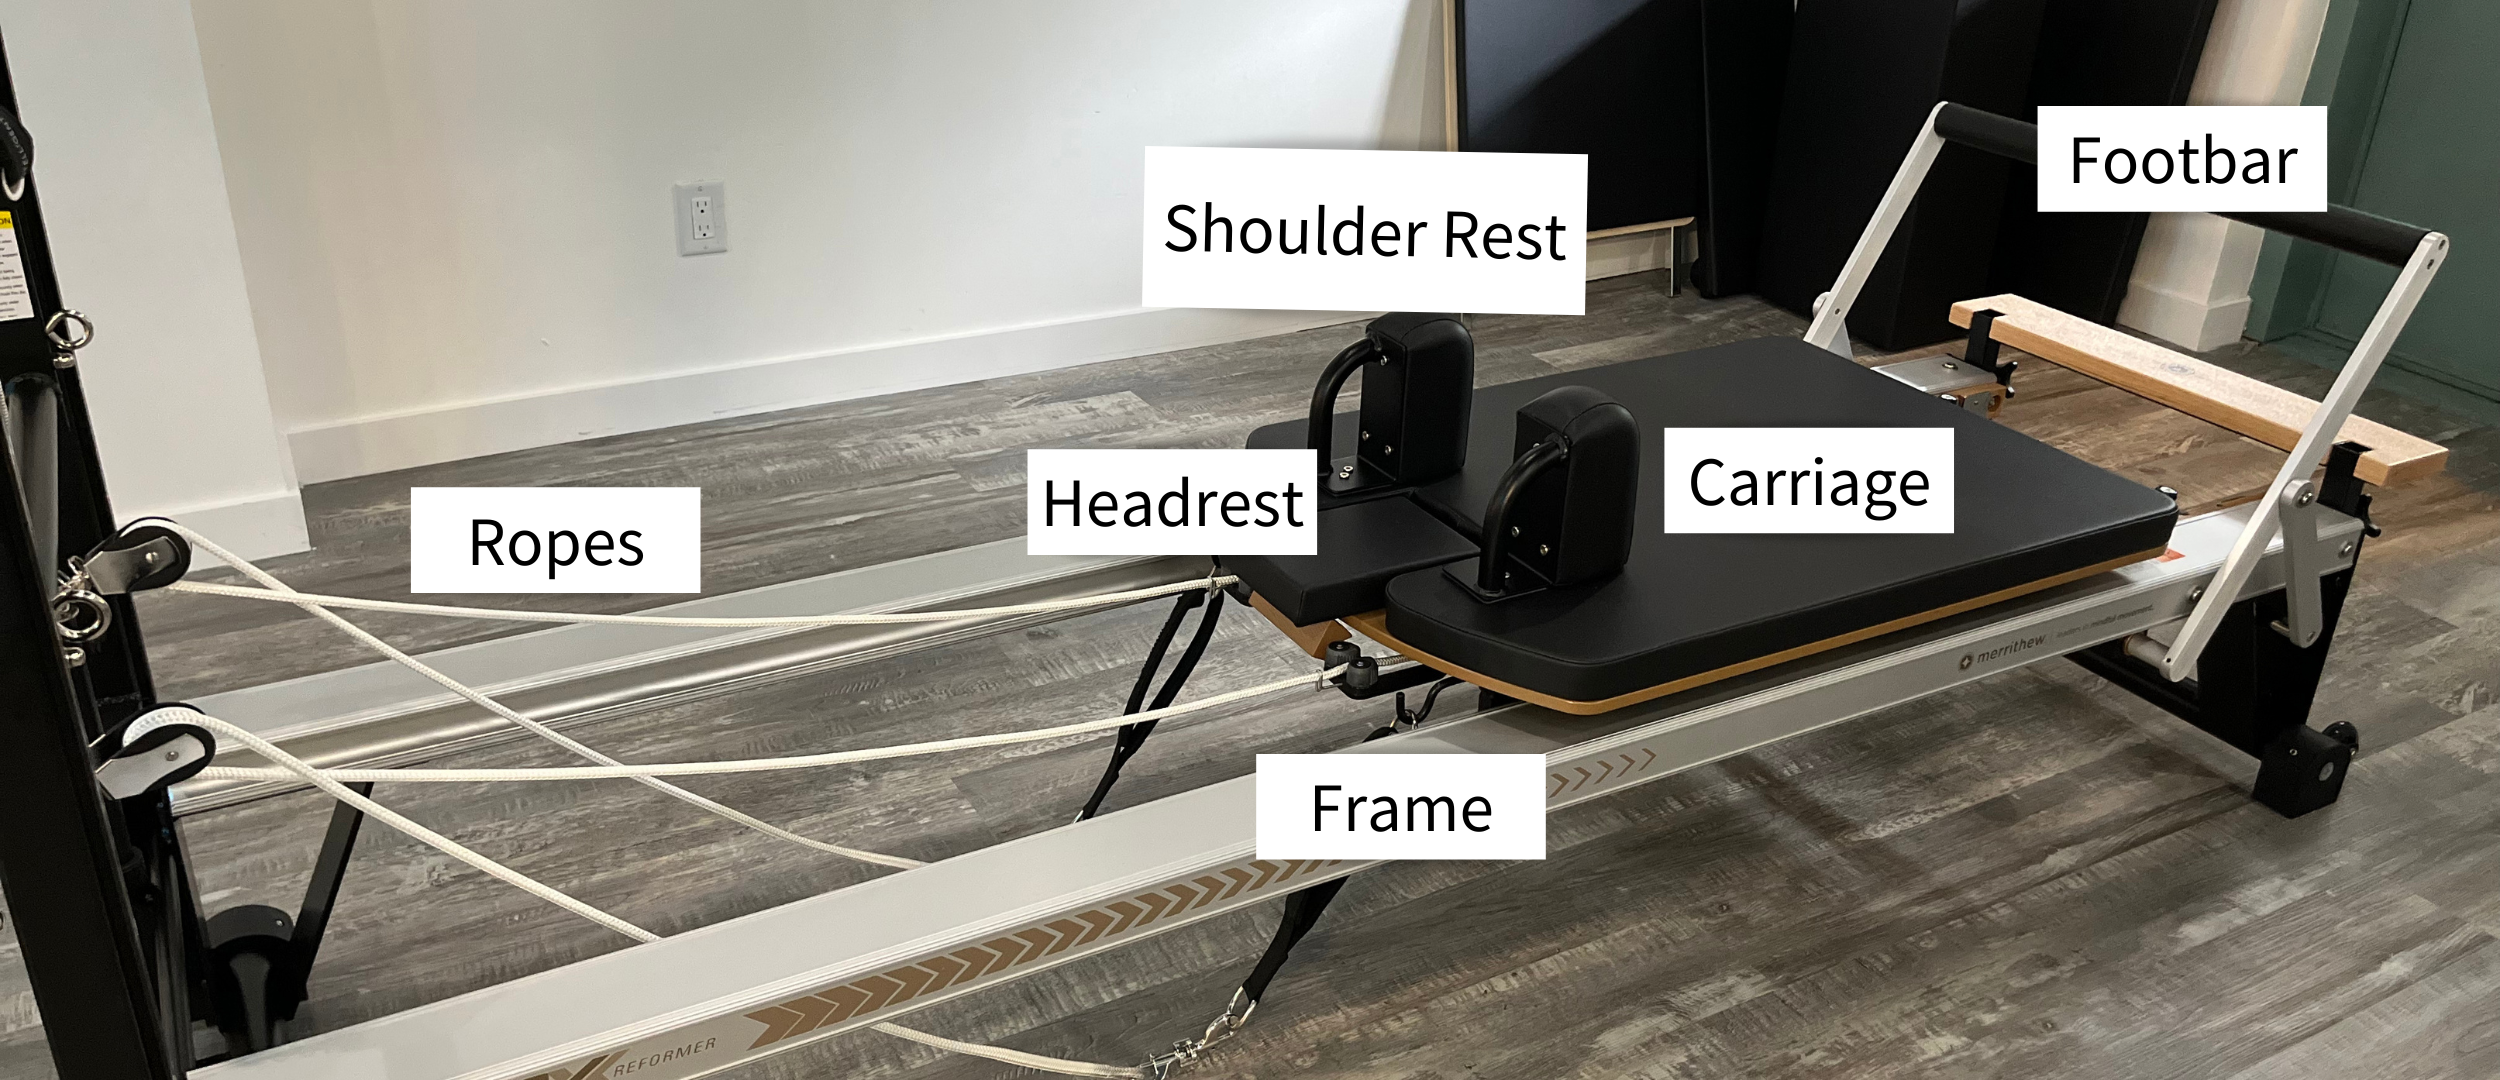 What is a Reformer? And How Does it Benefit Me? — FreeForm Physio & Pilates